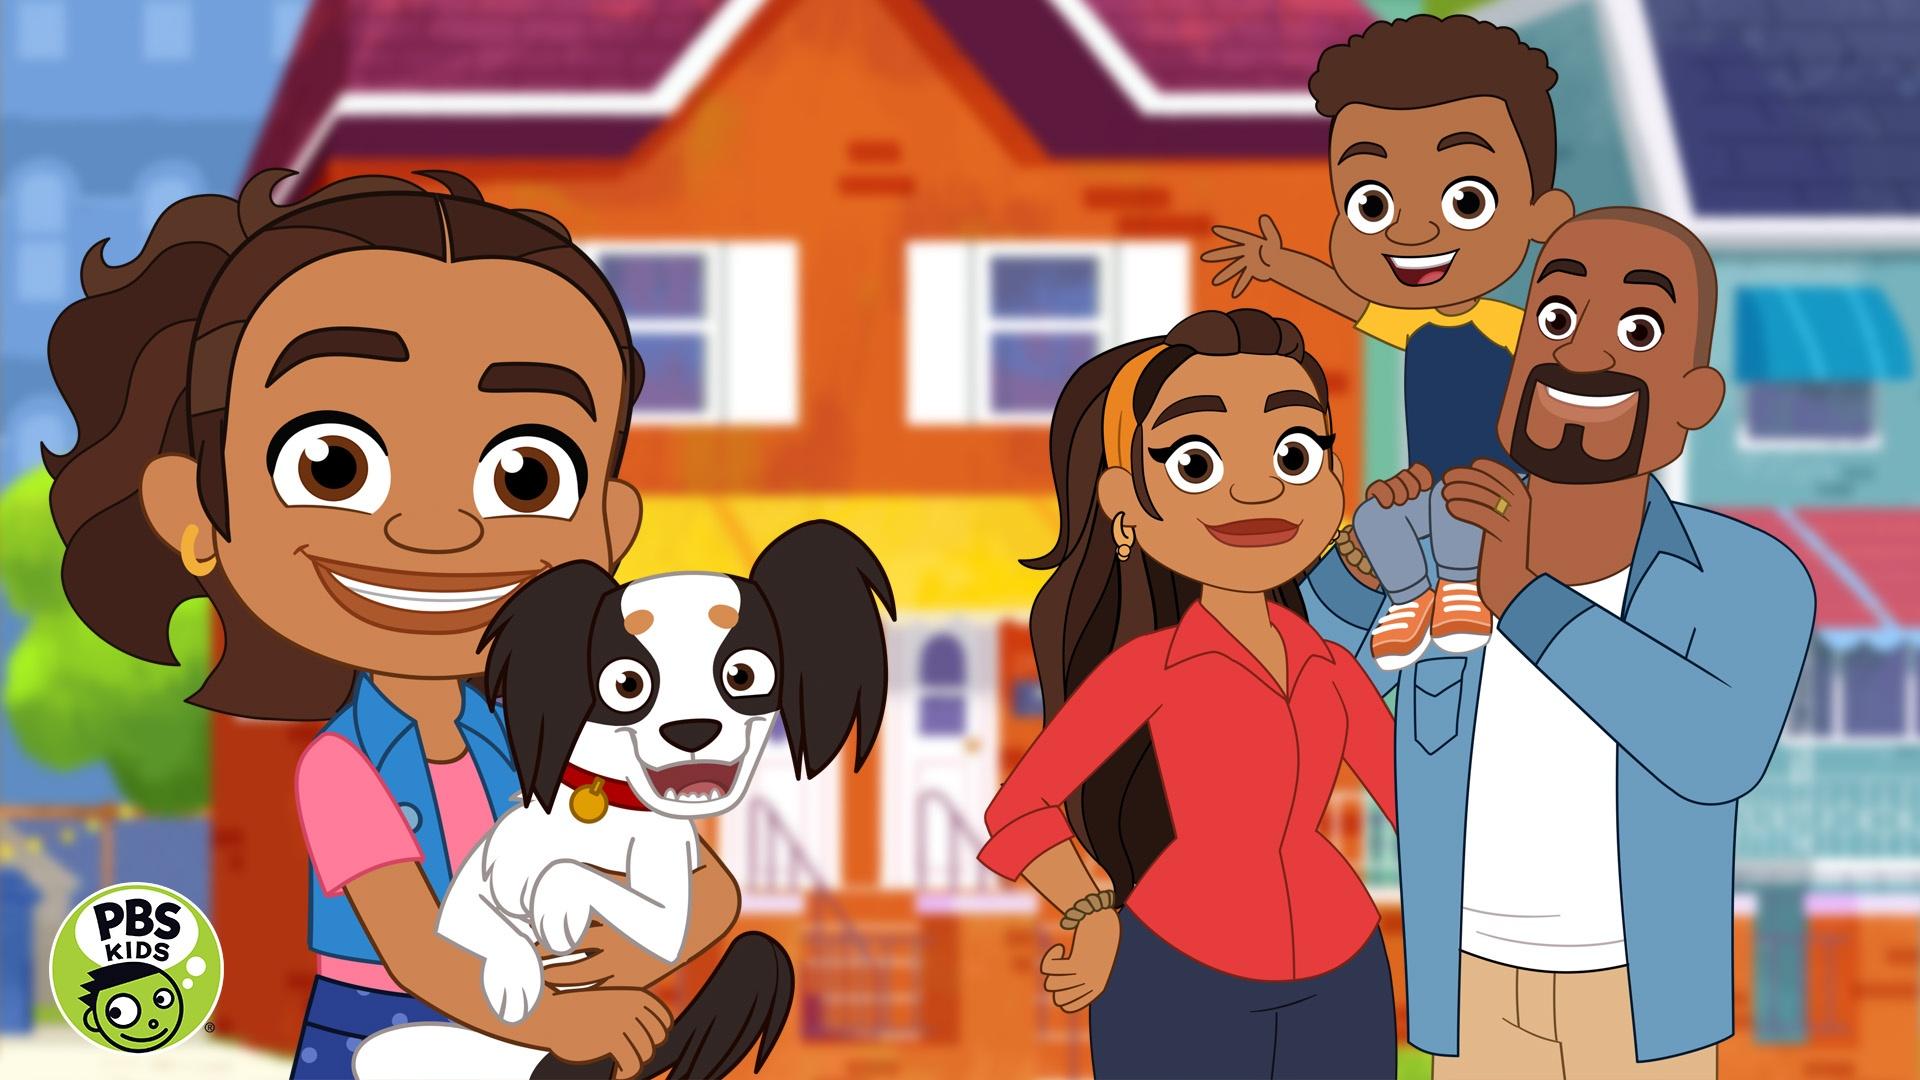 PBS KIDS Announces ALMA’S WAY, Series from Fred Rogers Productions